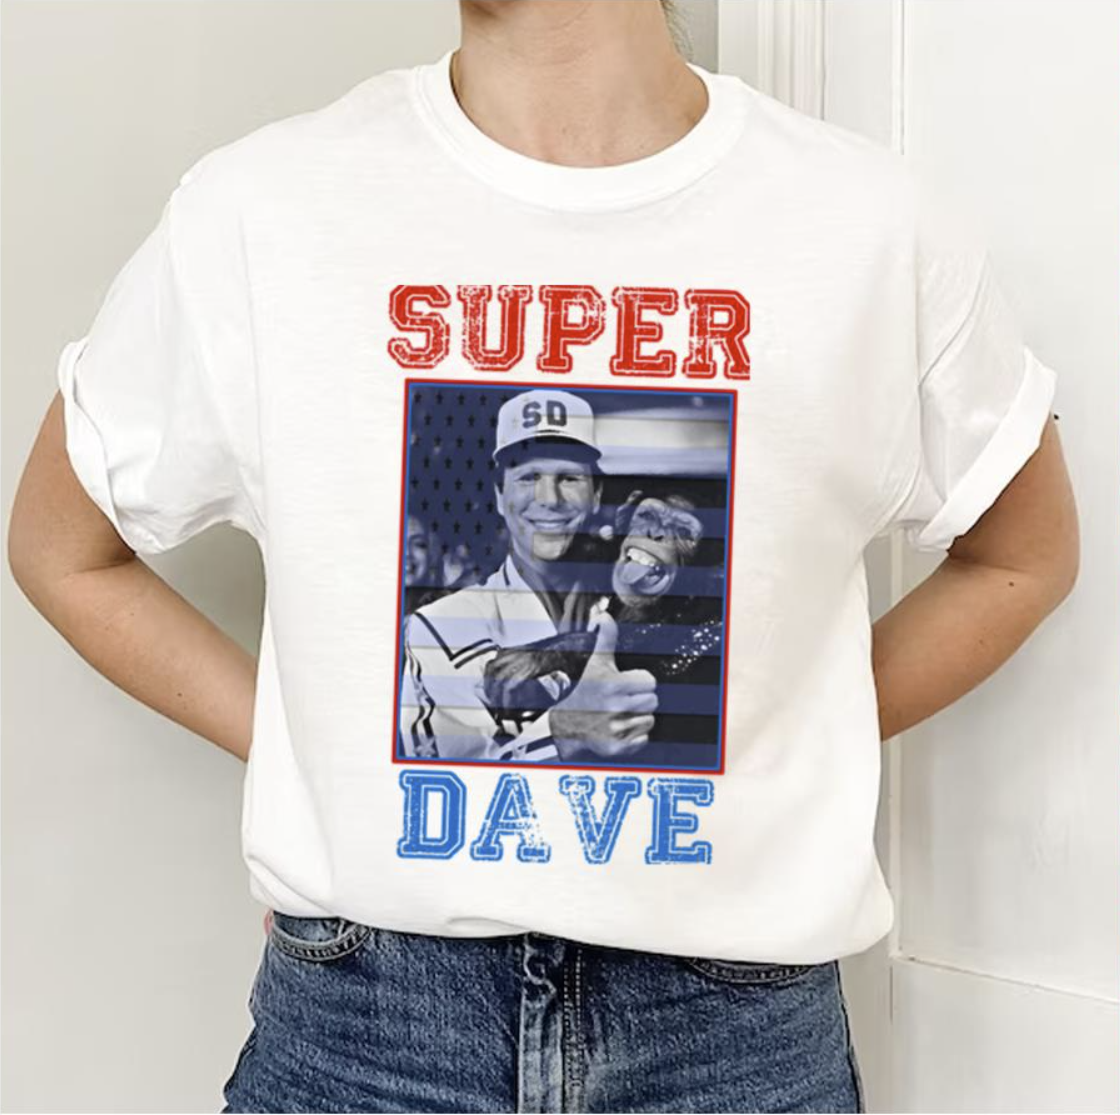 Super Dave Funny Guy Curb Your Enthusiasm shirt